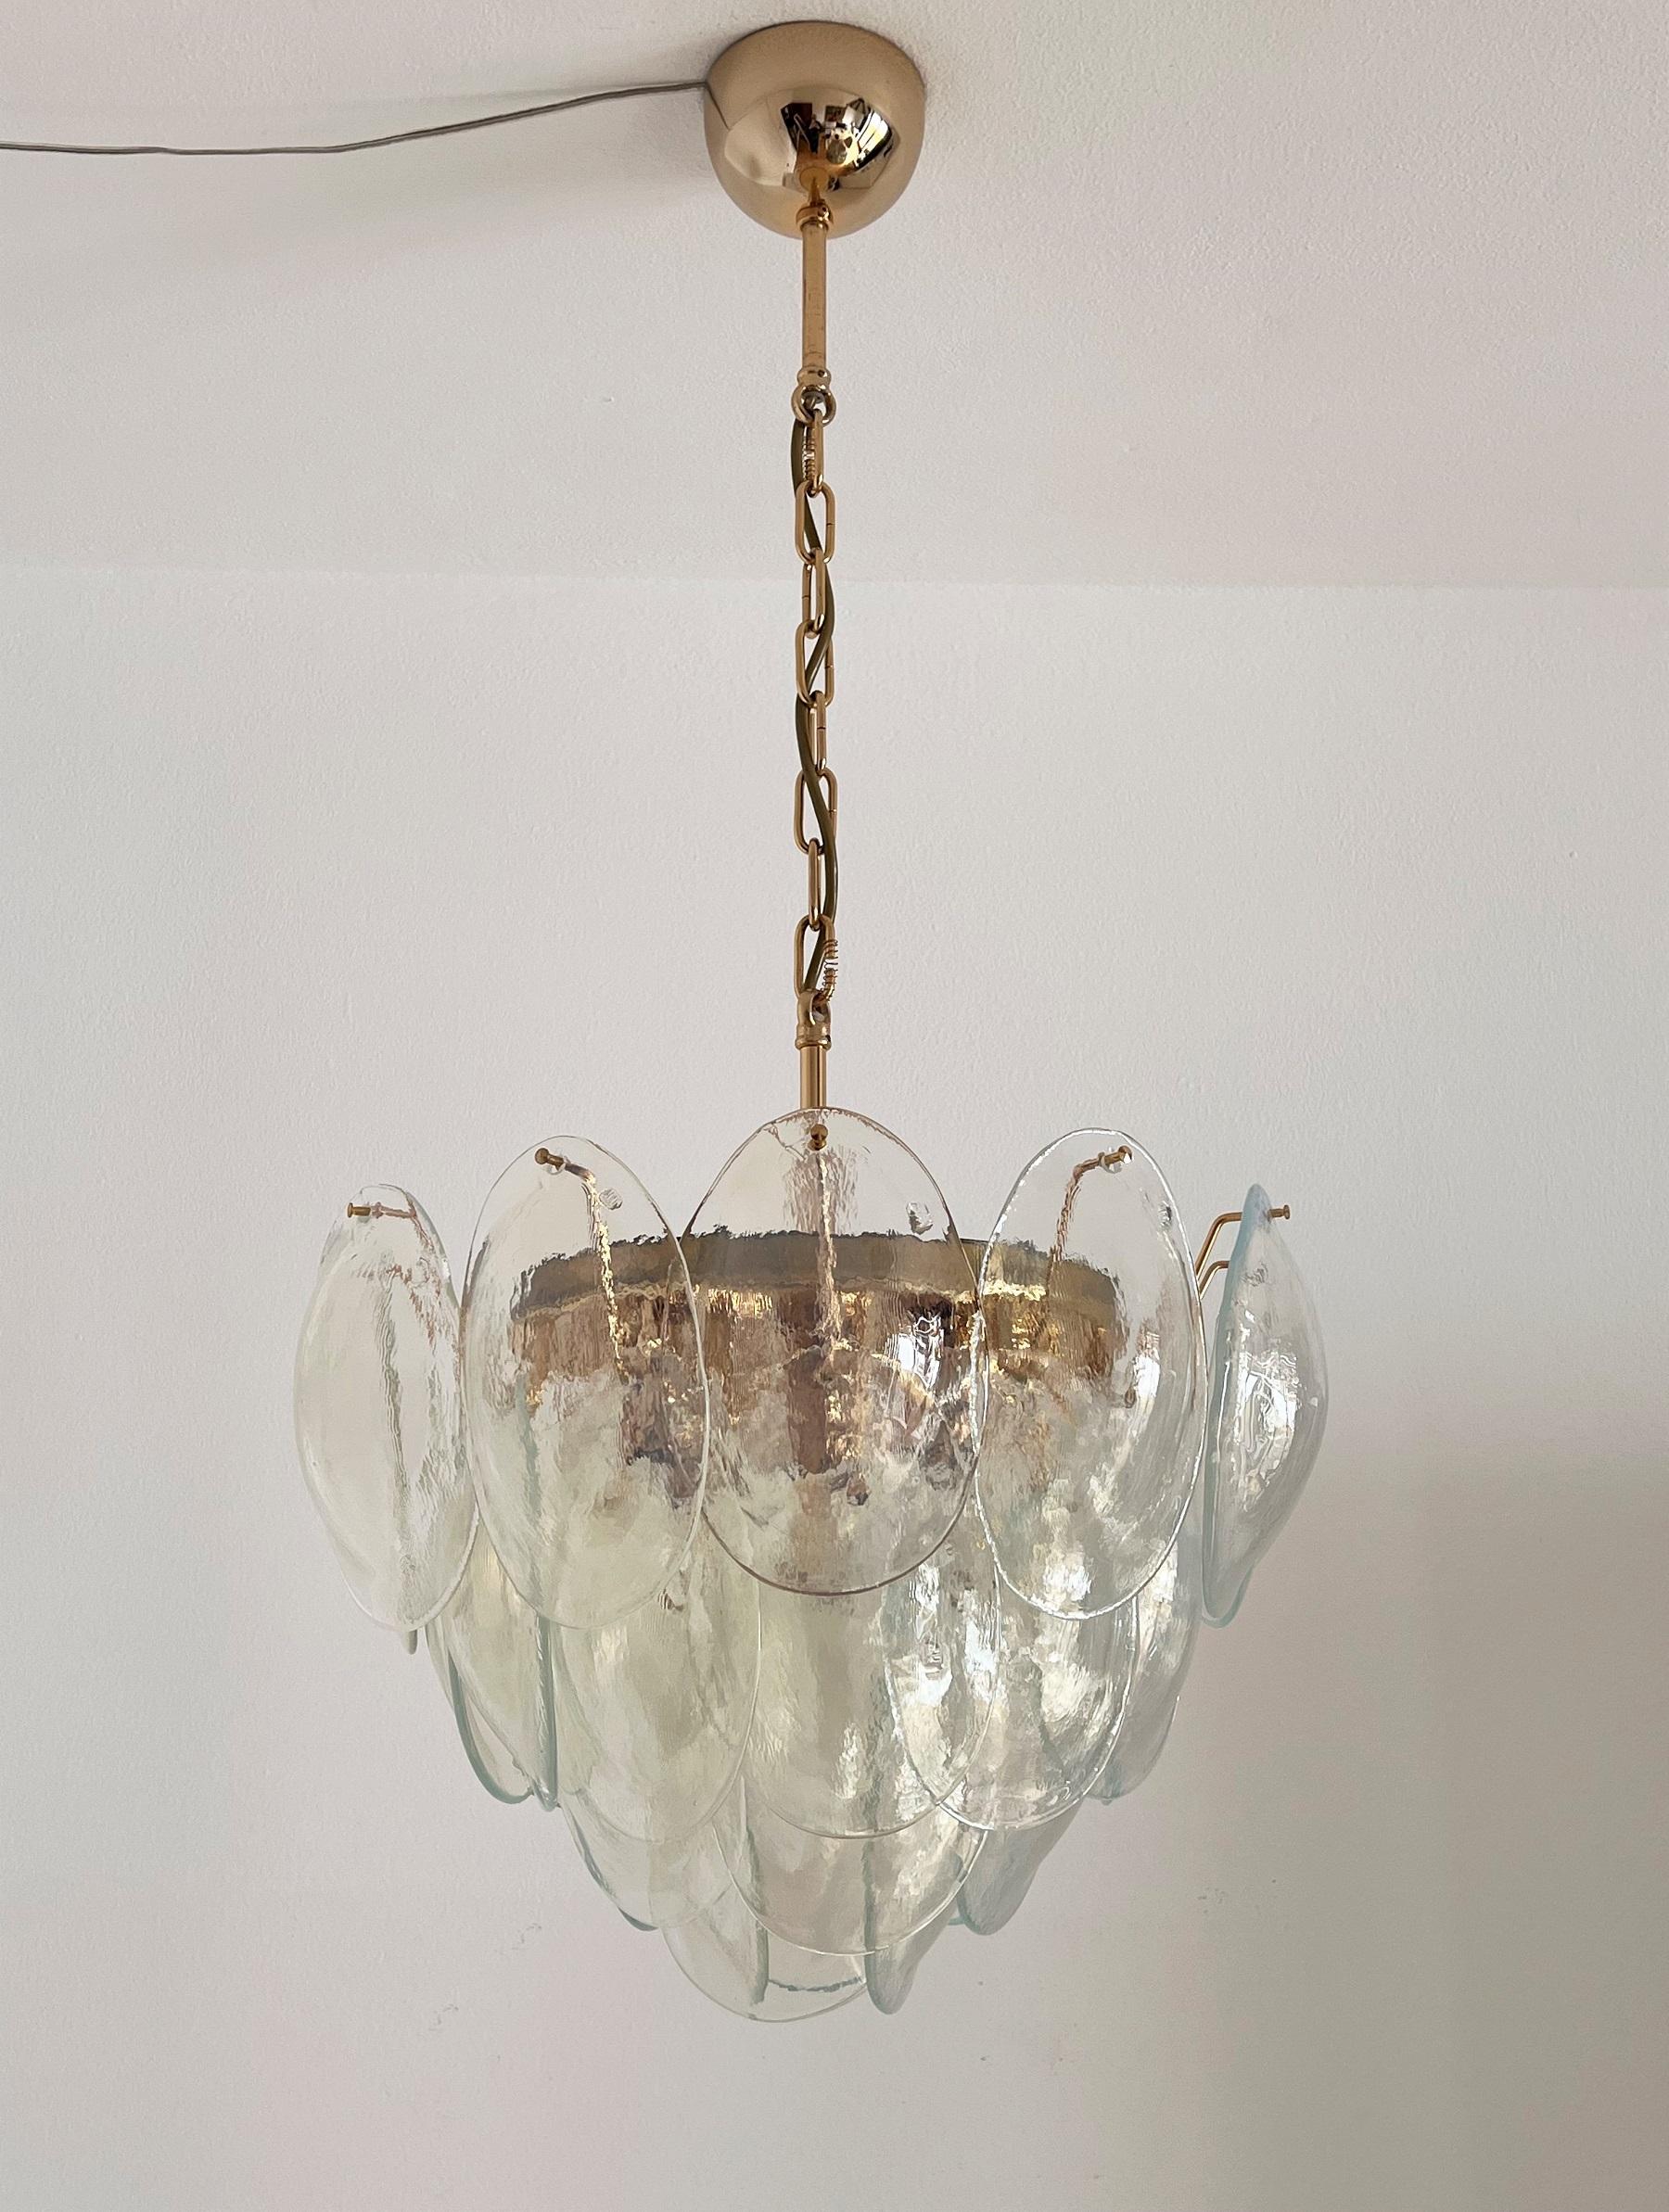 Beautiful signed chandelier in the shape of a big flower with 32 curvy glass petals, made in Murano, Italy by La Murrina during the 1970s.
All handcrafted glass petals are made of shiny transparent flurry glass with opalescent white nuances, which